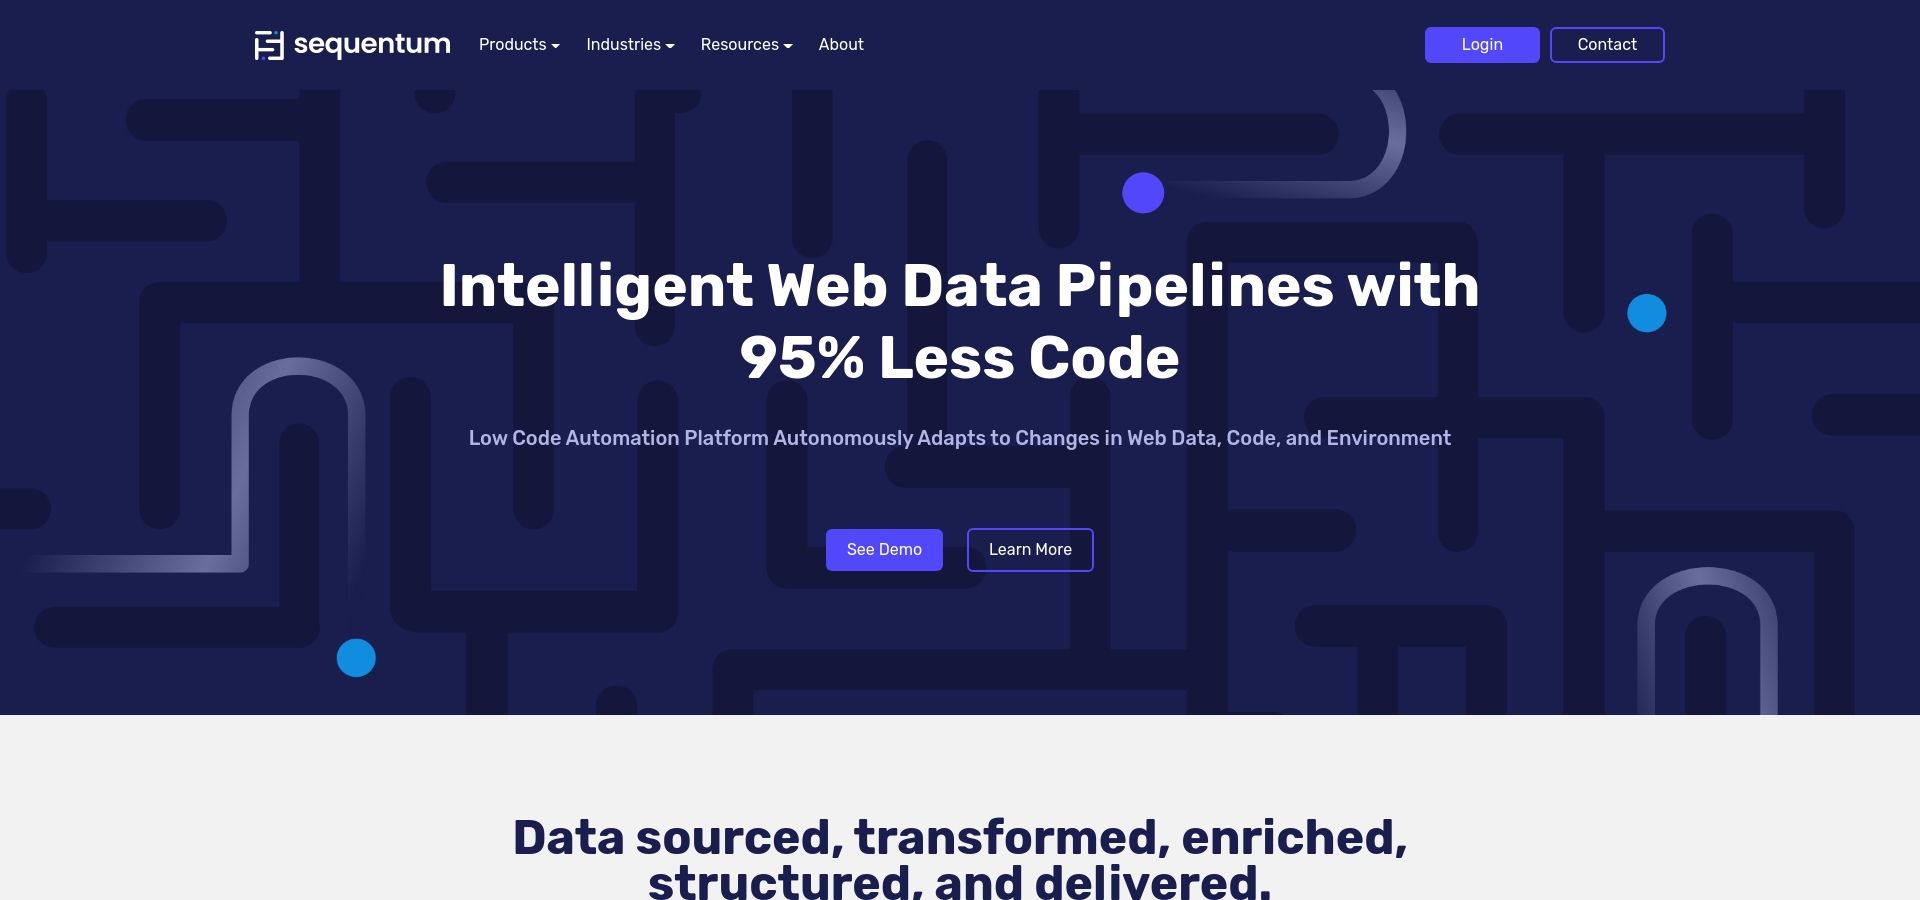 Sequentum - Intelligent Web Data Pipelines with 95% Less Code